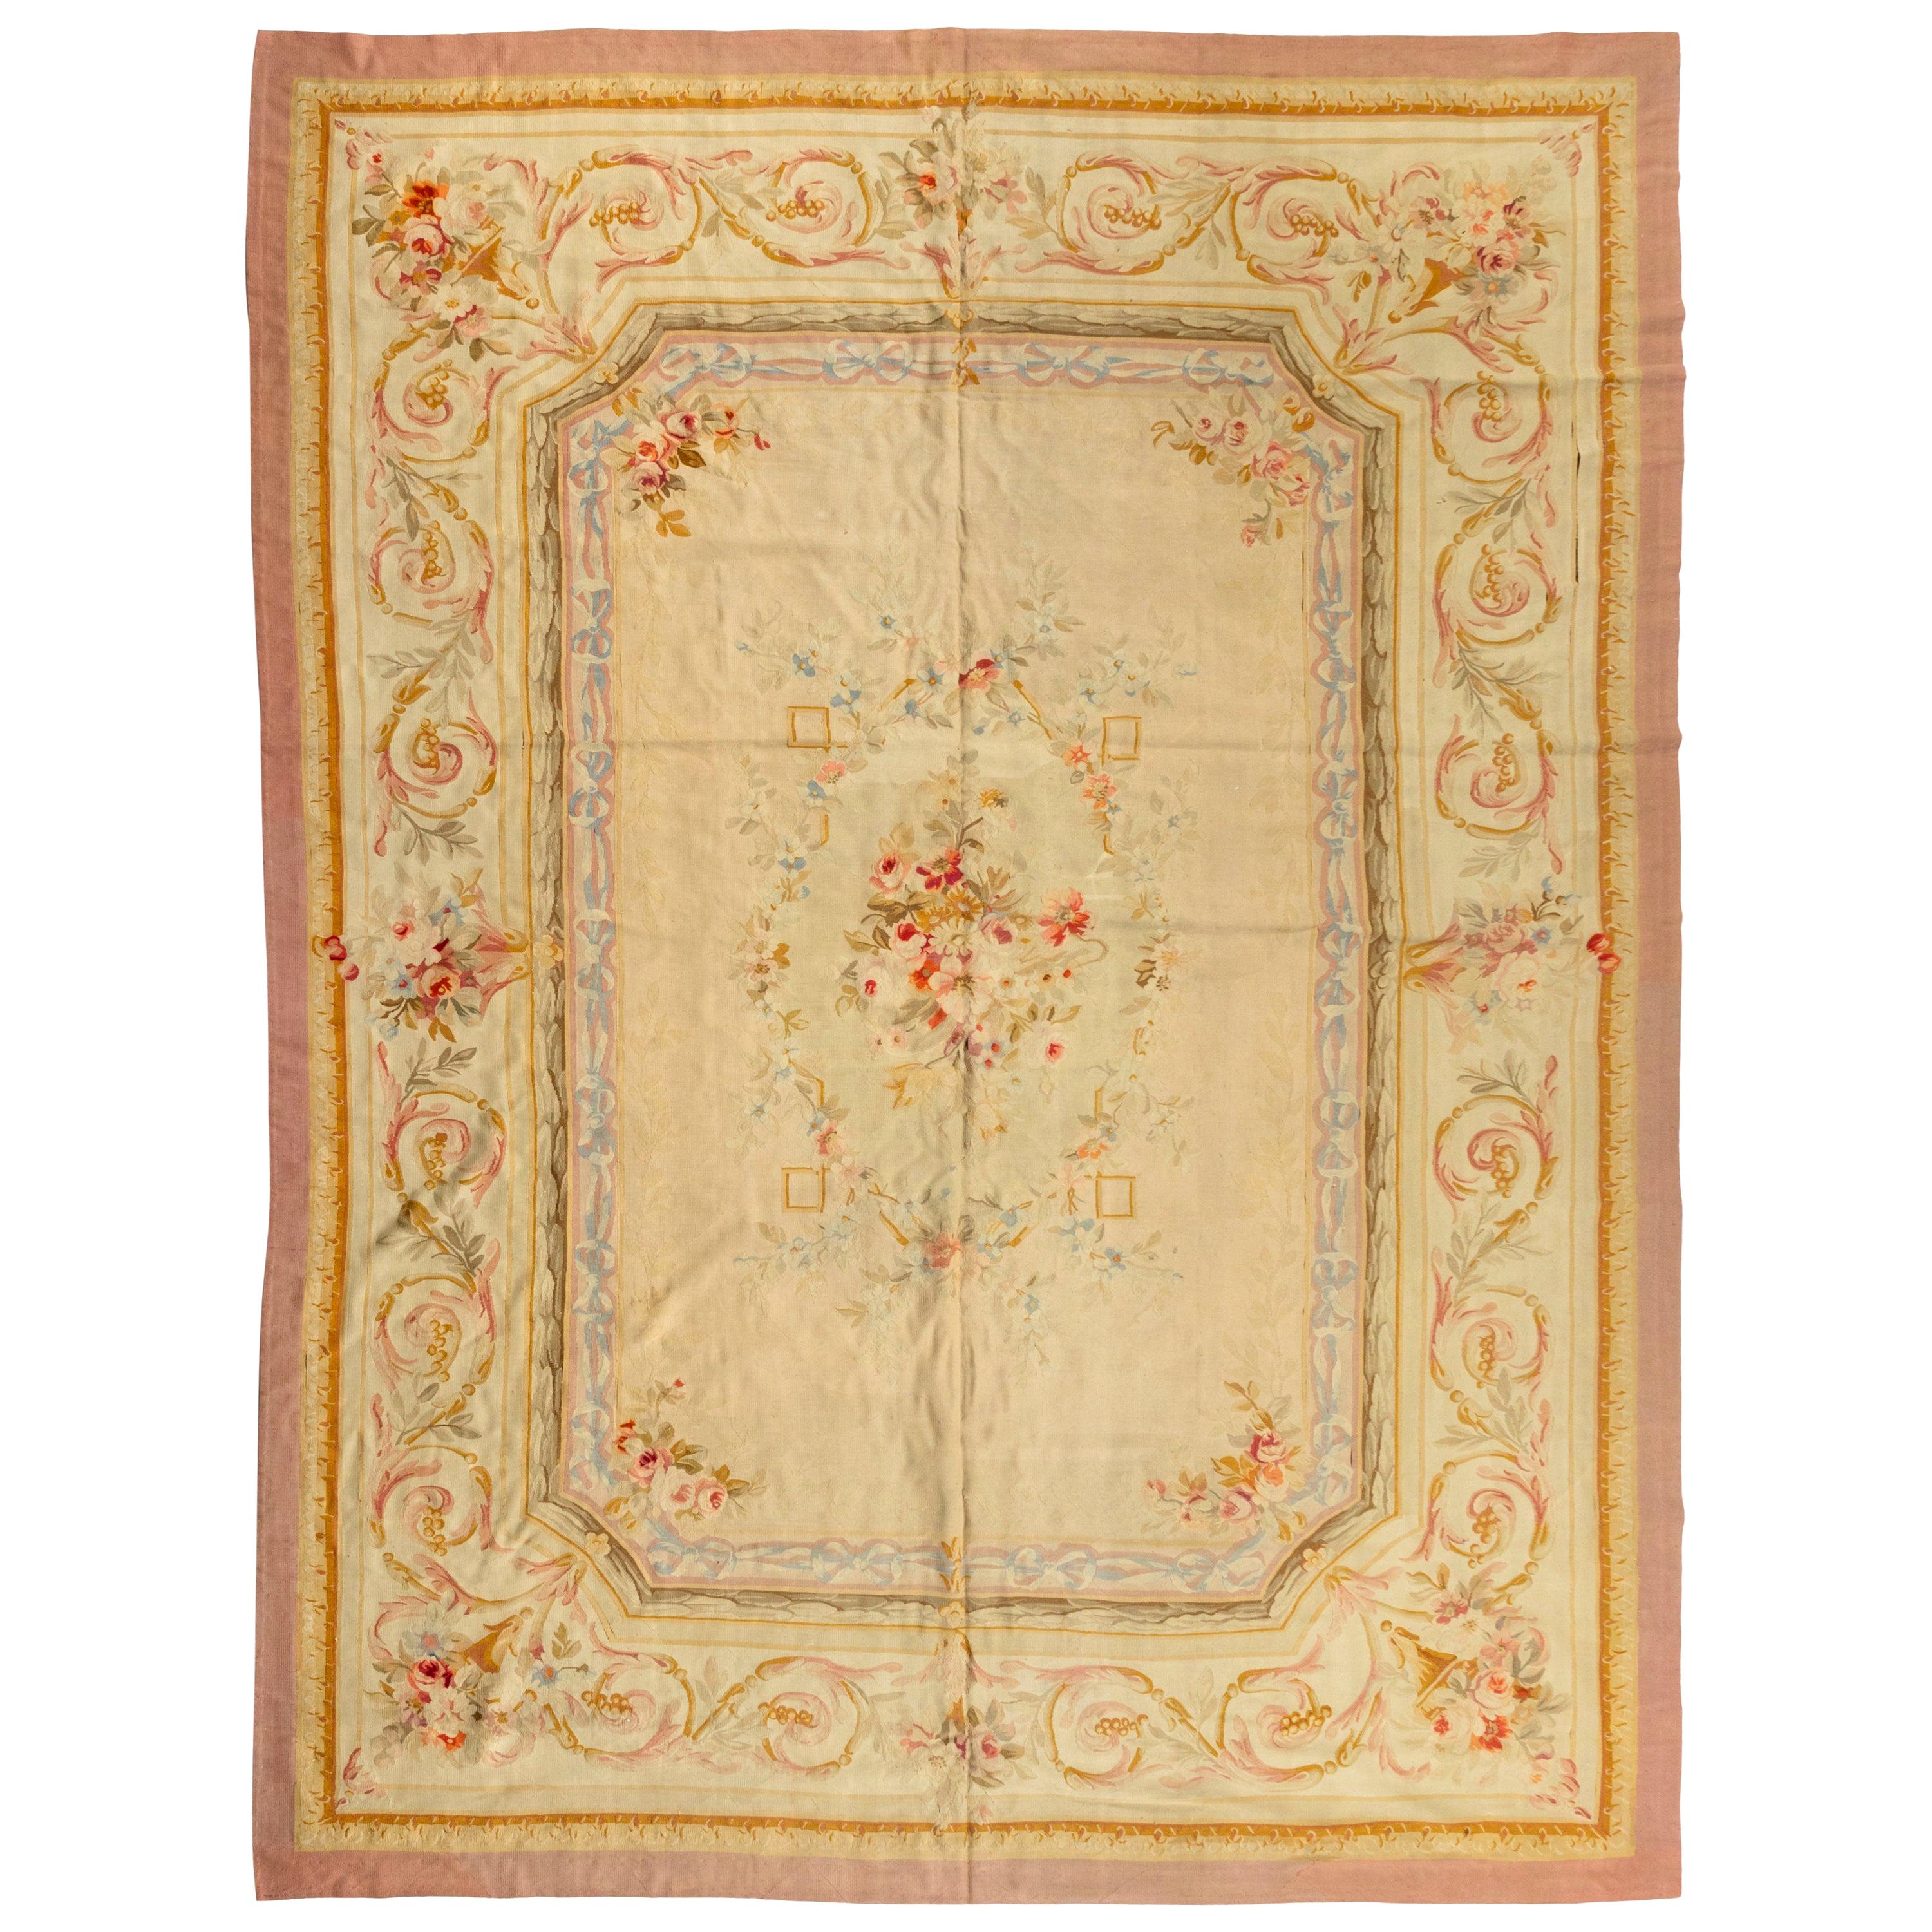 Late 19th Century Antique Ivory and Beige Floral French Aubusson Tapestry Rug